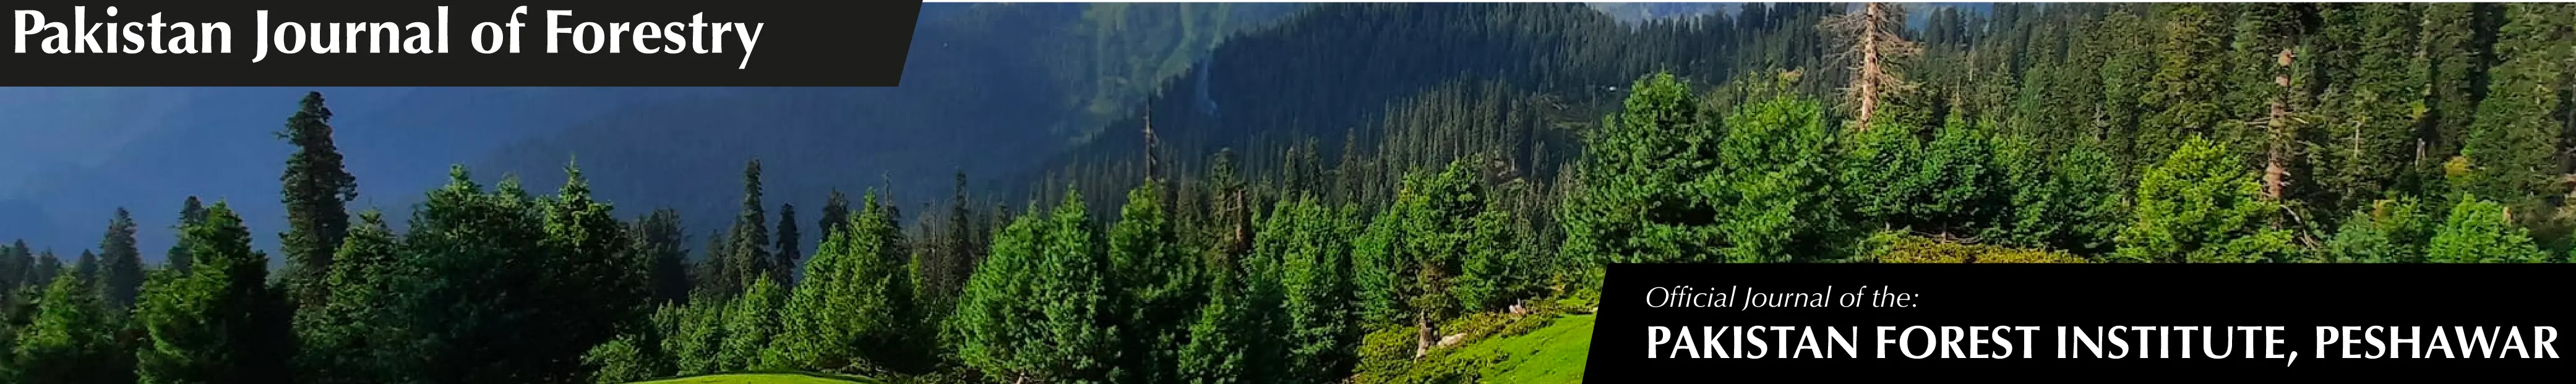 Pakistan Journal of Forestry